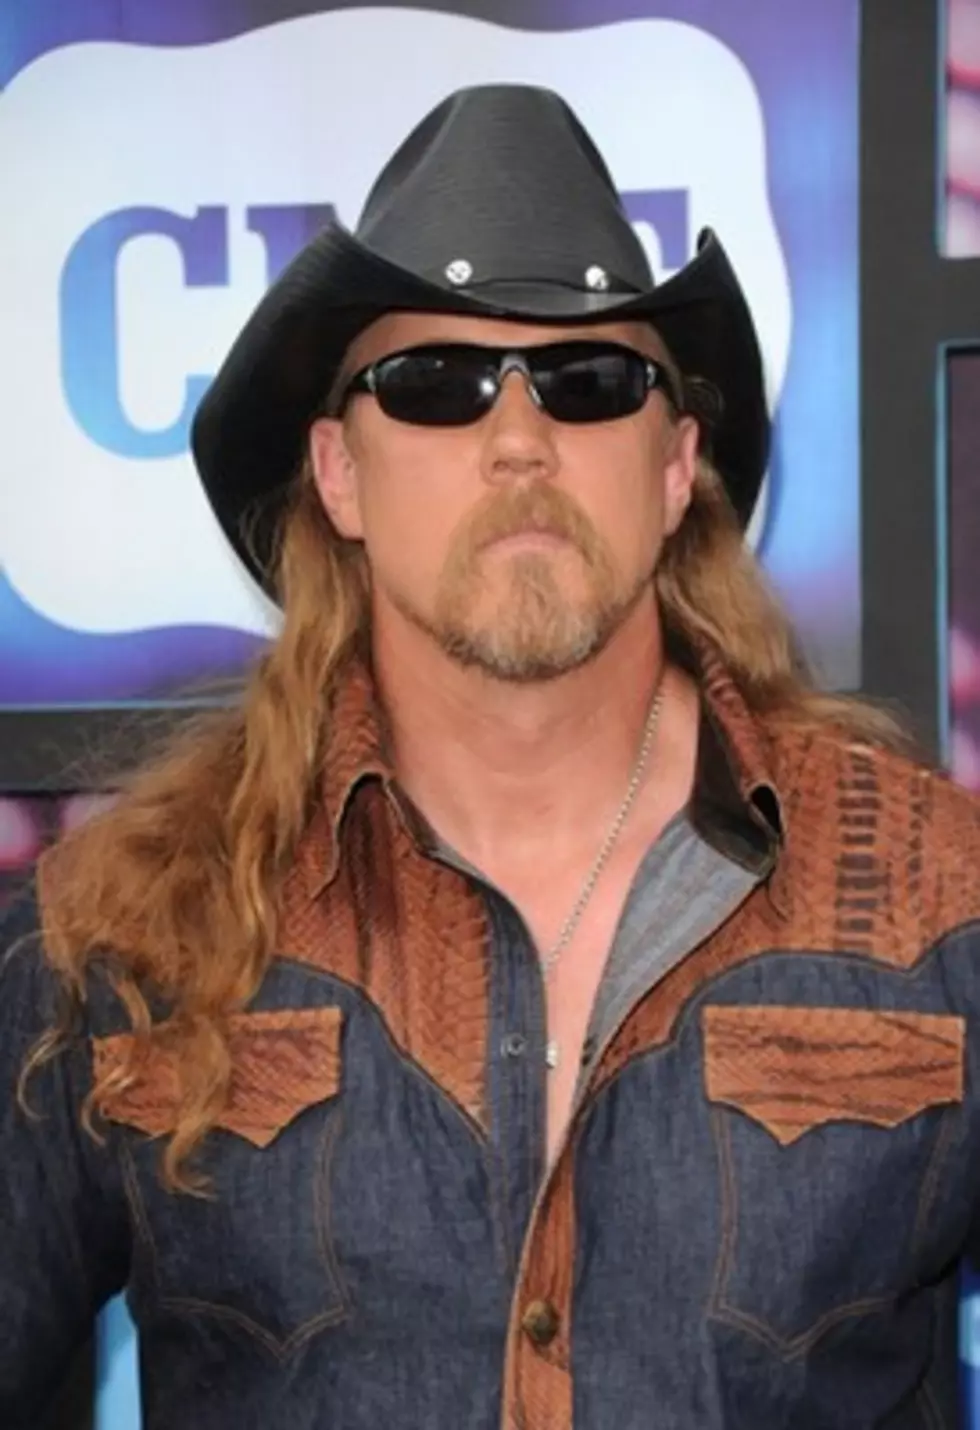 Trace Adkins ‘Songs And Stories’ Tour Announced